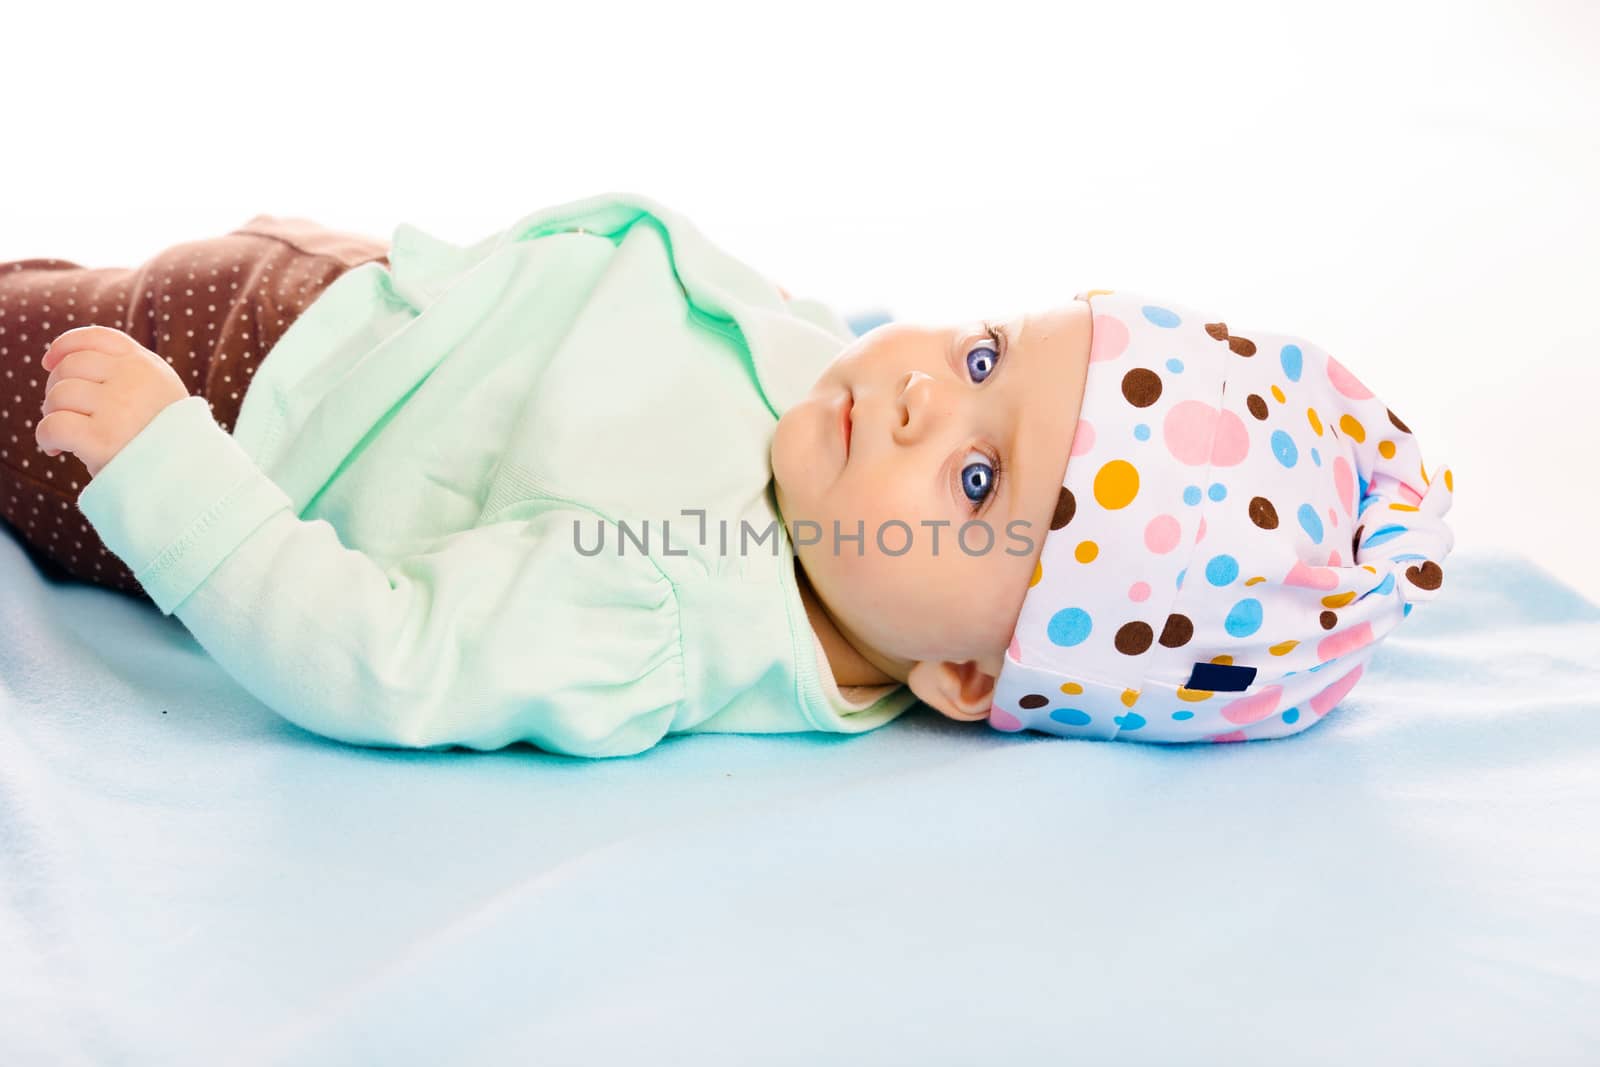 the baby in the hat on a blue blanket